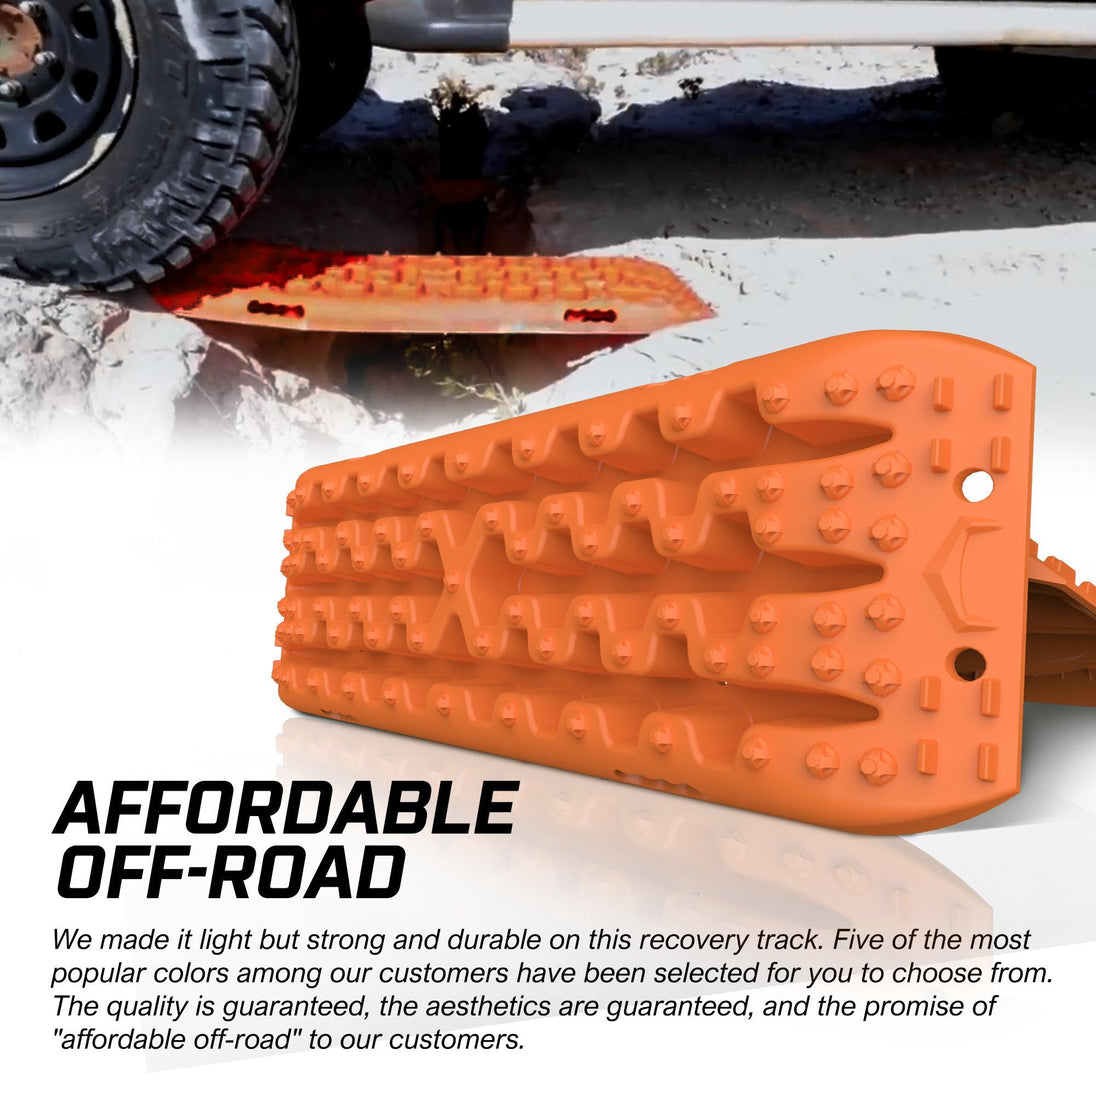 Buy X-BULL 2PCS Recovery Tracks Boards Snow Mud Truck 4WD With Carry bag discounted | Products On Sale Australia